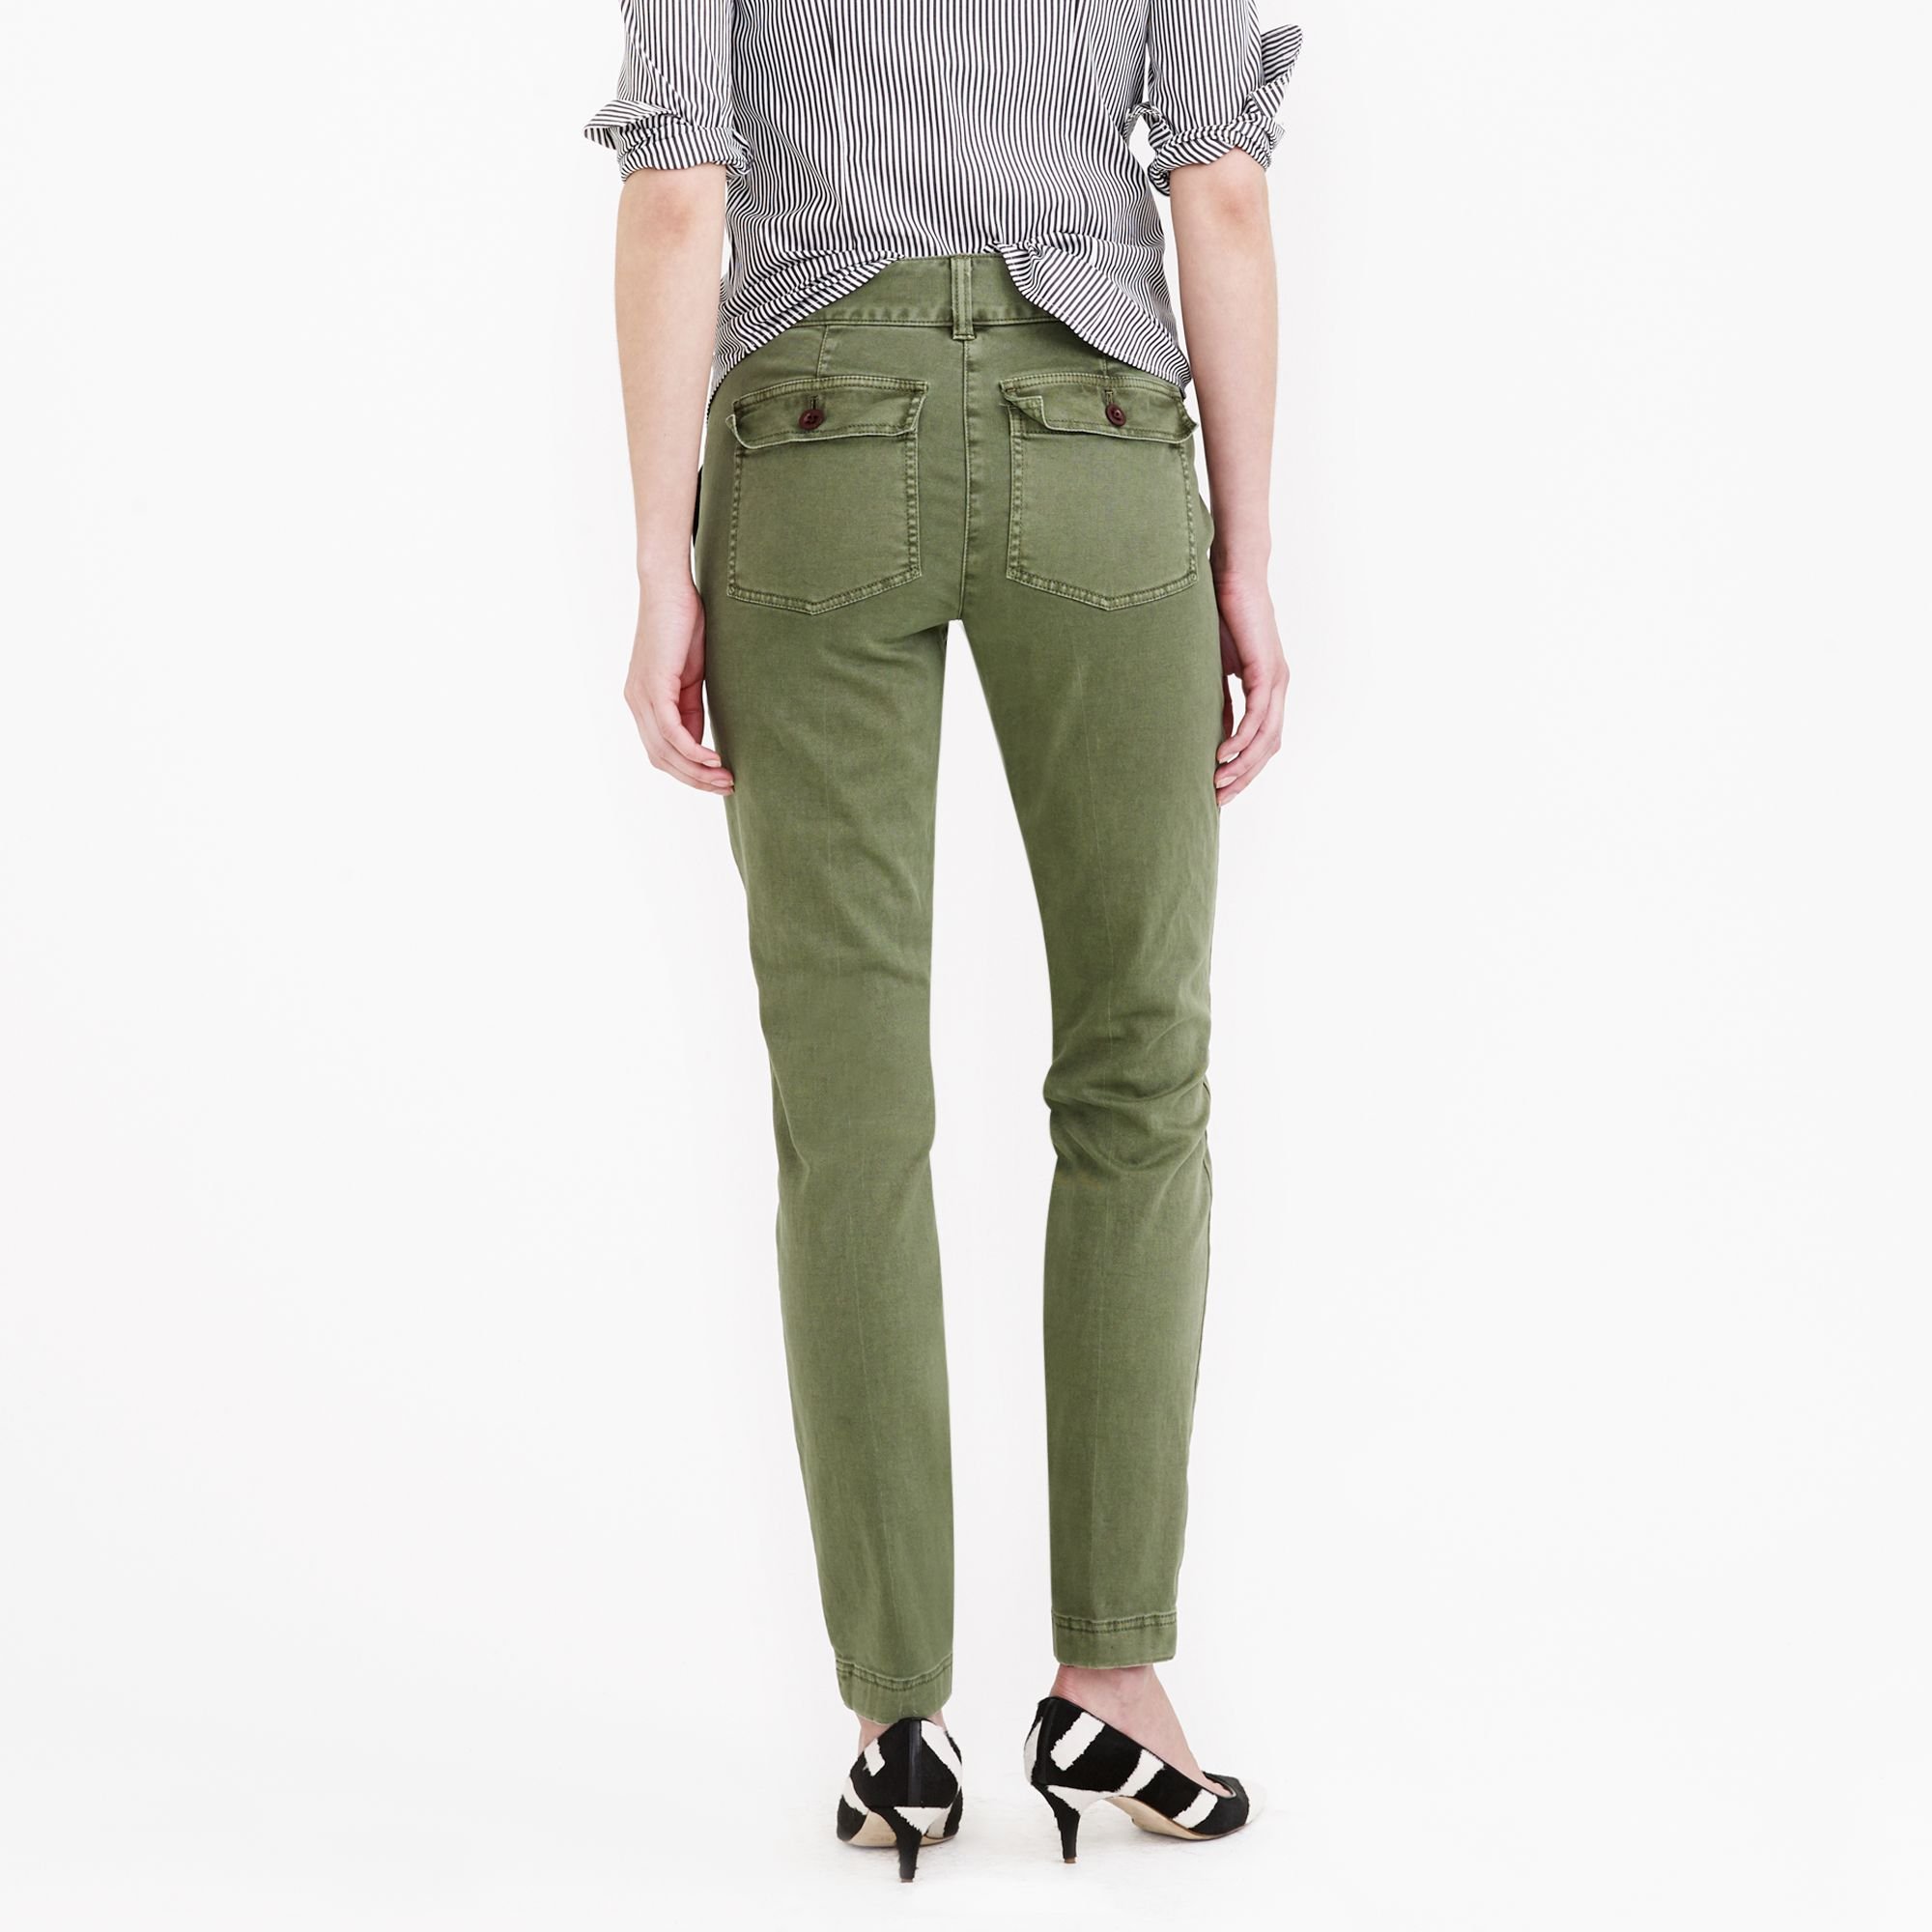 Lyst - J.Crew Preorder Highrise Cargo Pant in Green